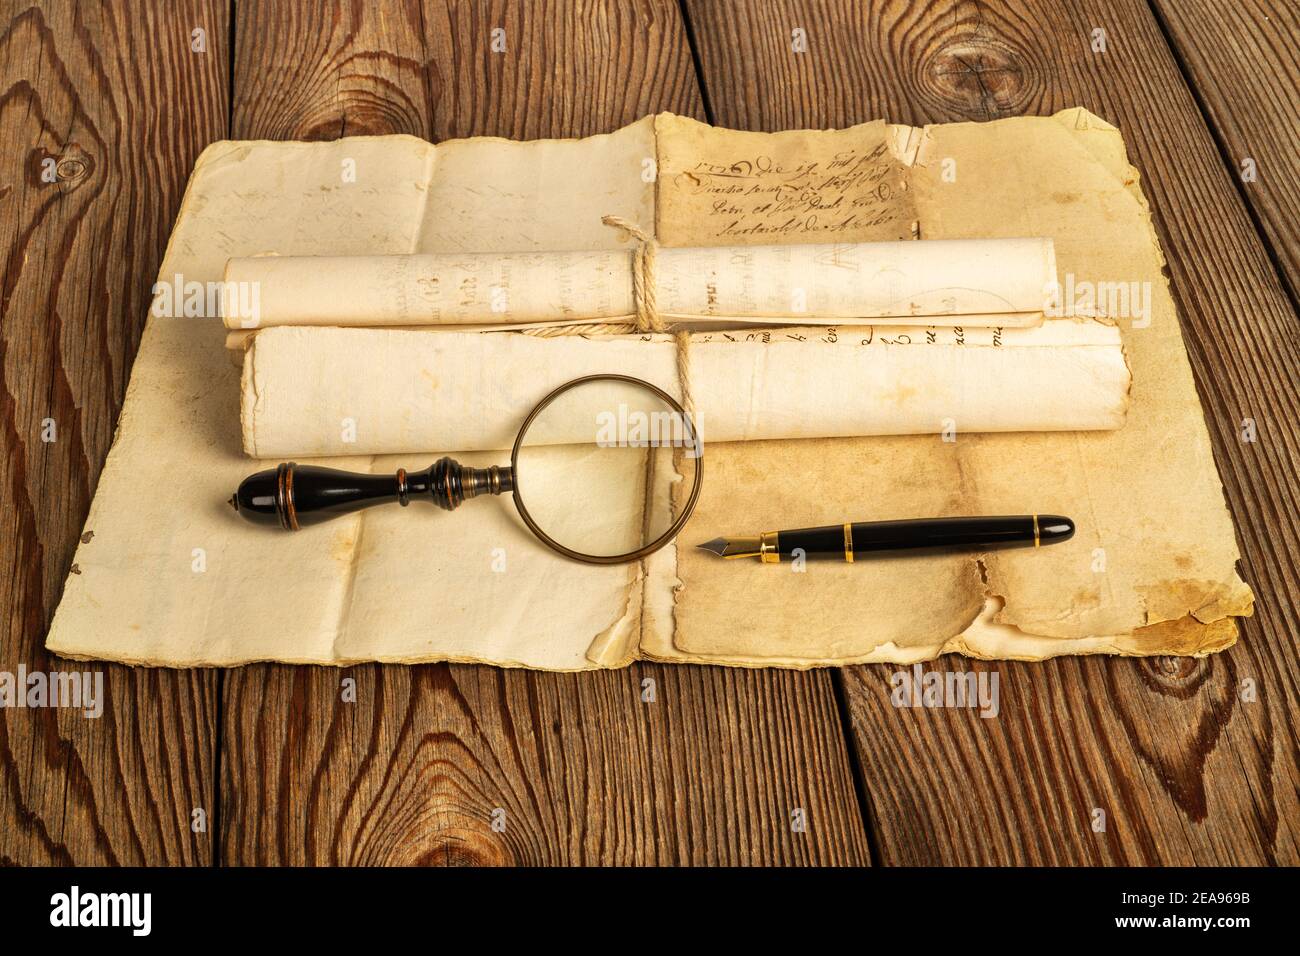 Fountain pen and magnifying glass with old sheets on wood background Stock Photo